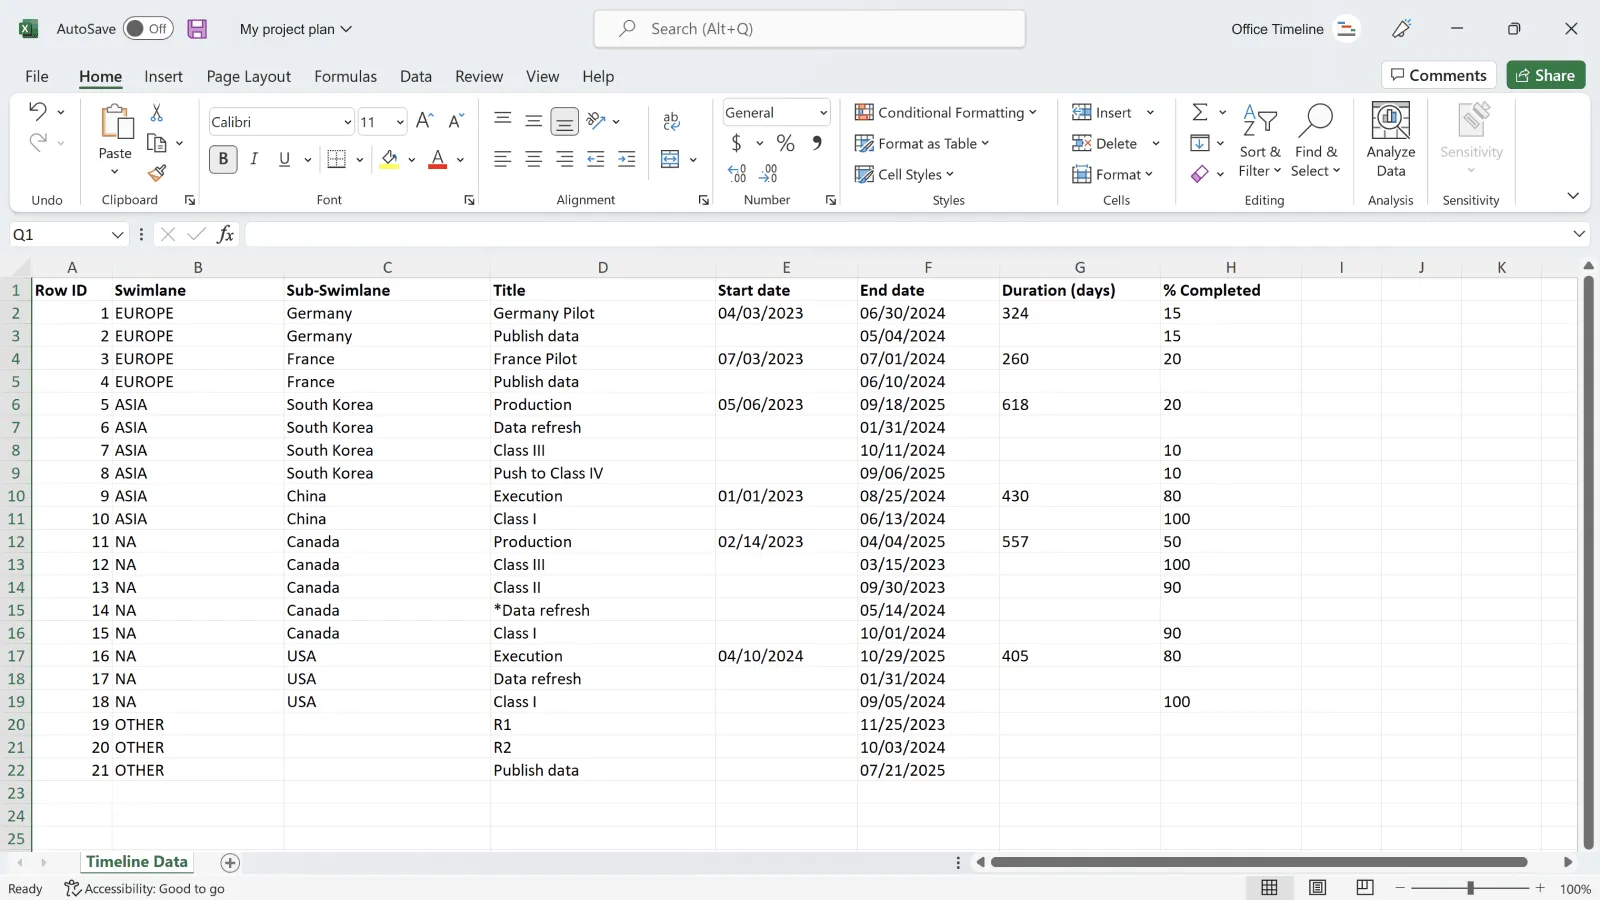 Project data in Excel before importing into Office Timeline Pro+